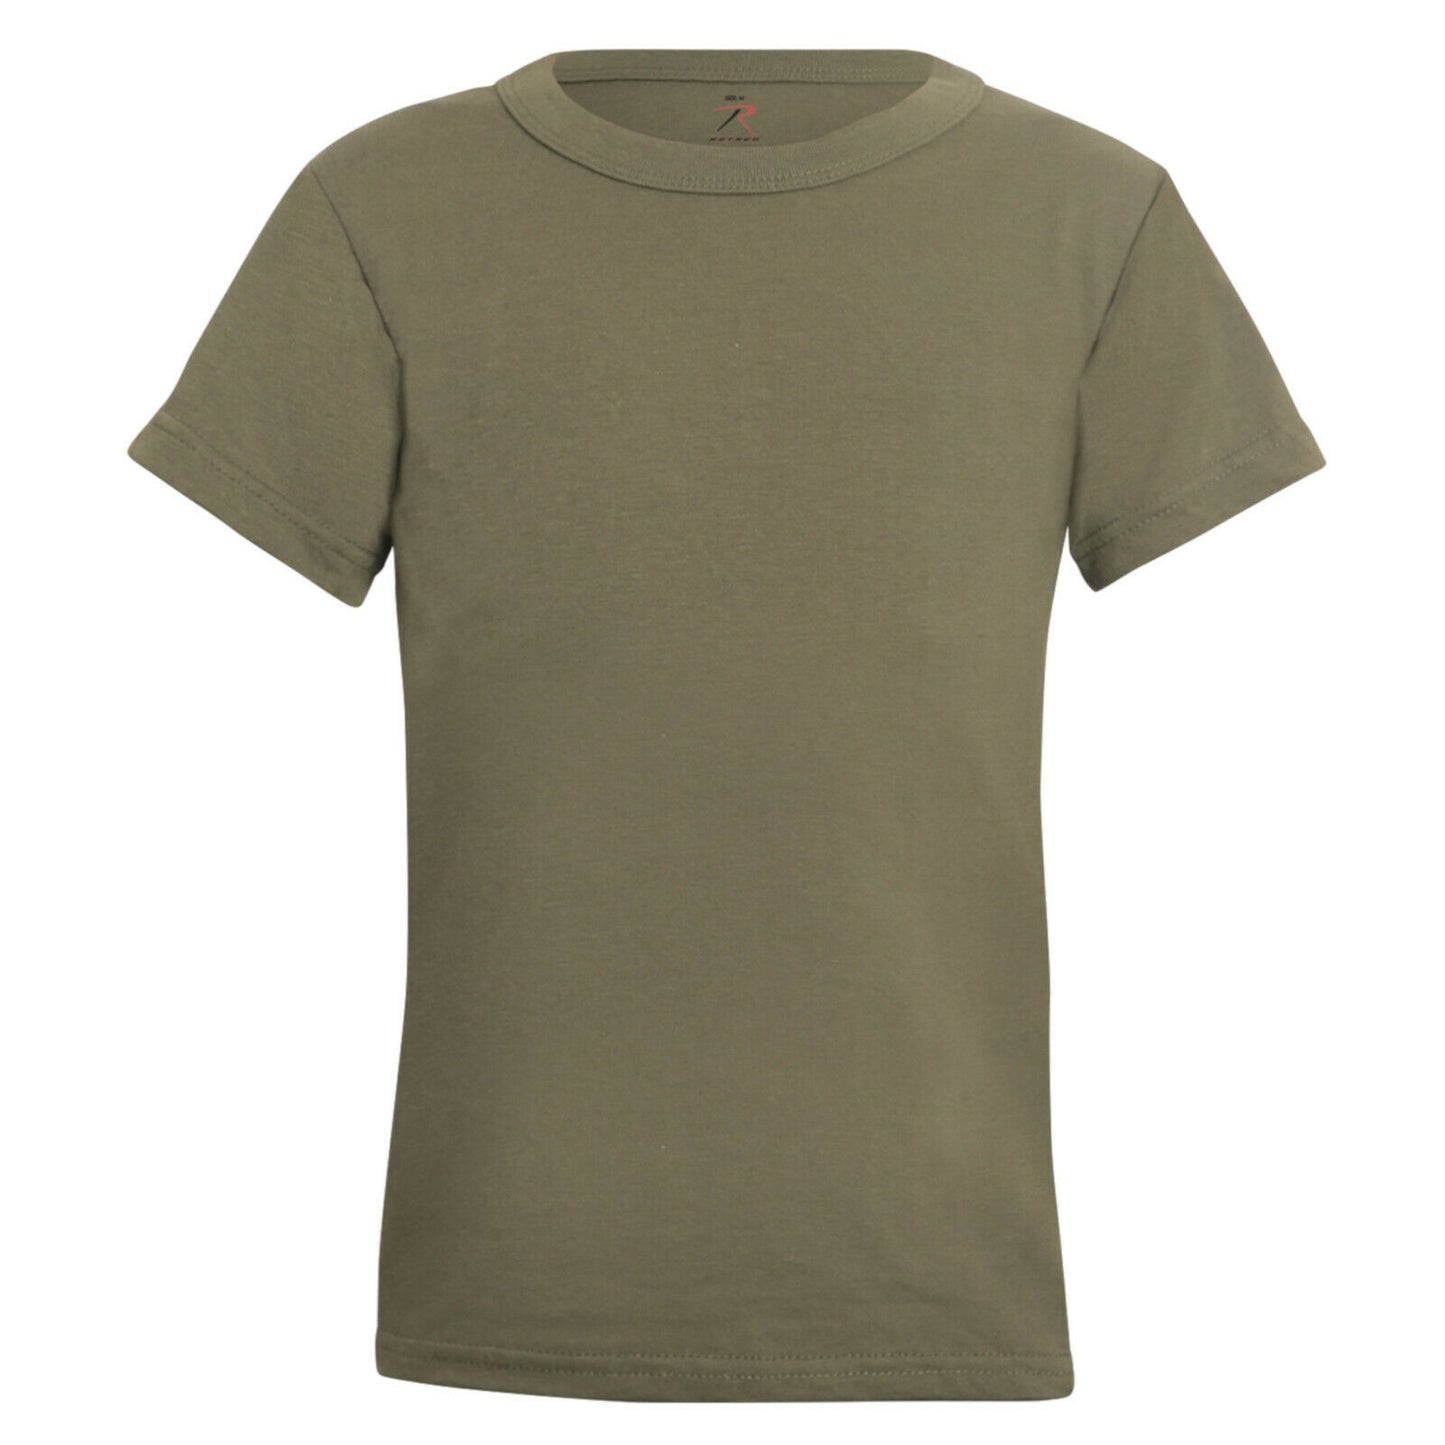 Rothco Kids T-Shirts - AR 670-1 Coyote Brown Childrens Style Tees